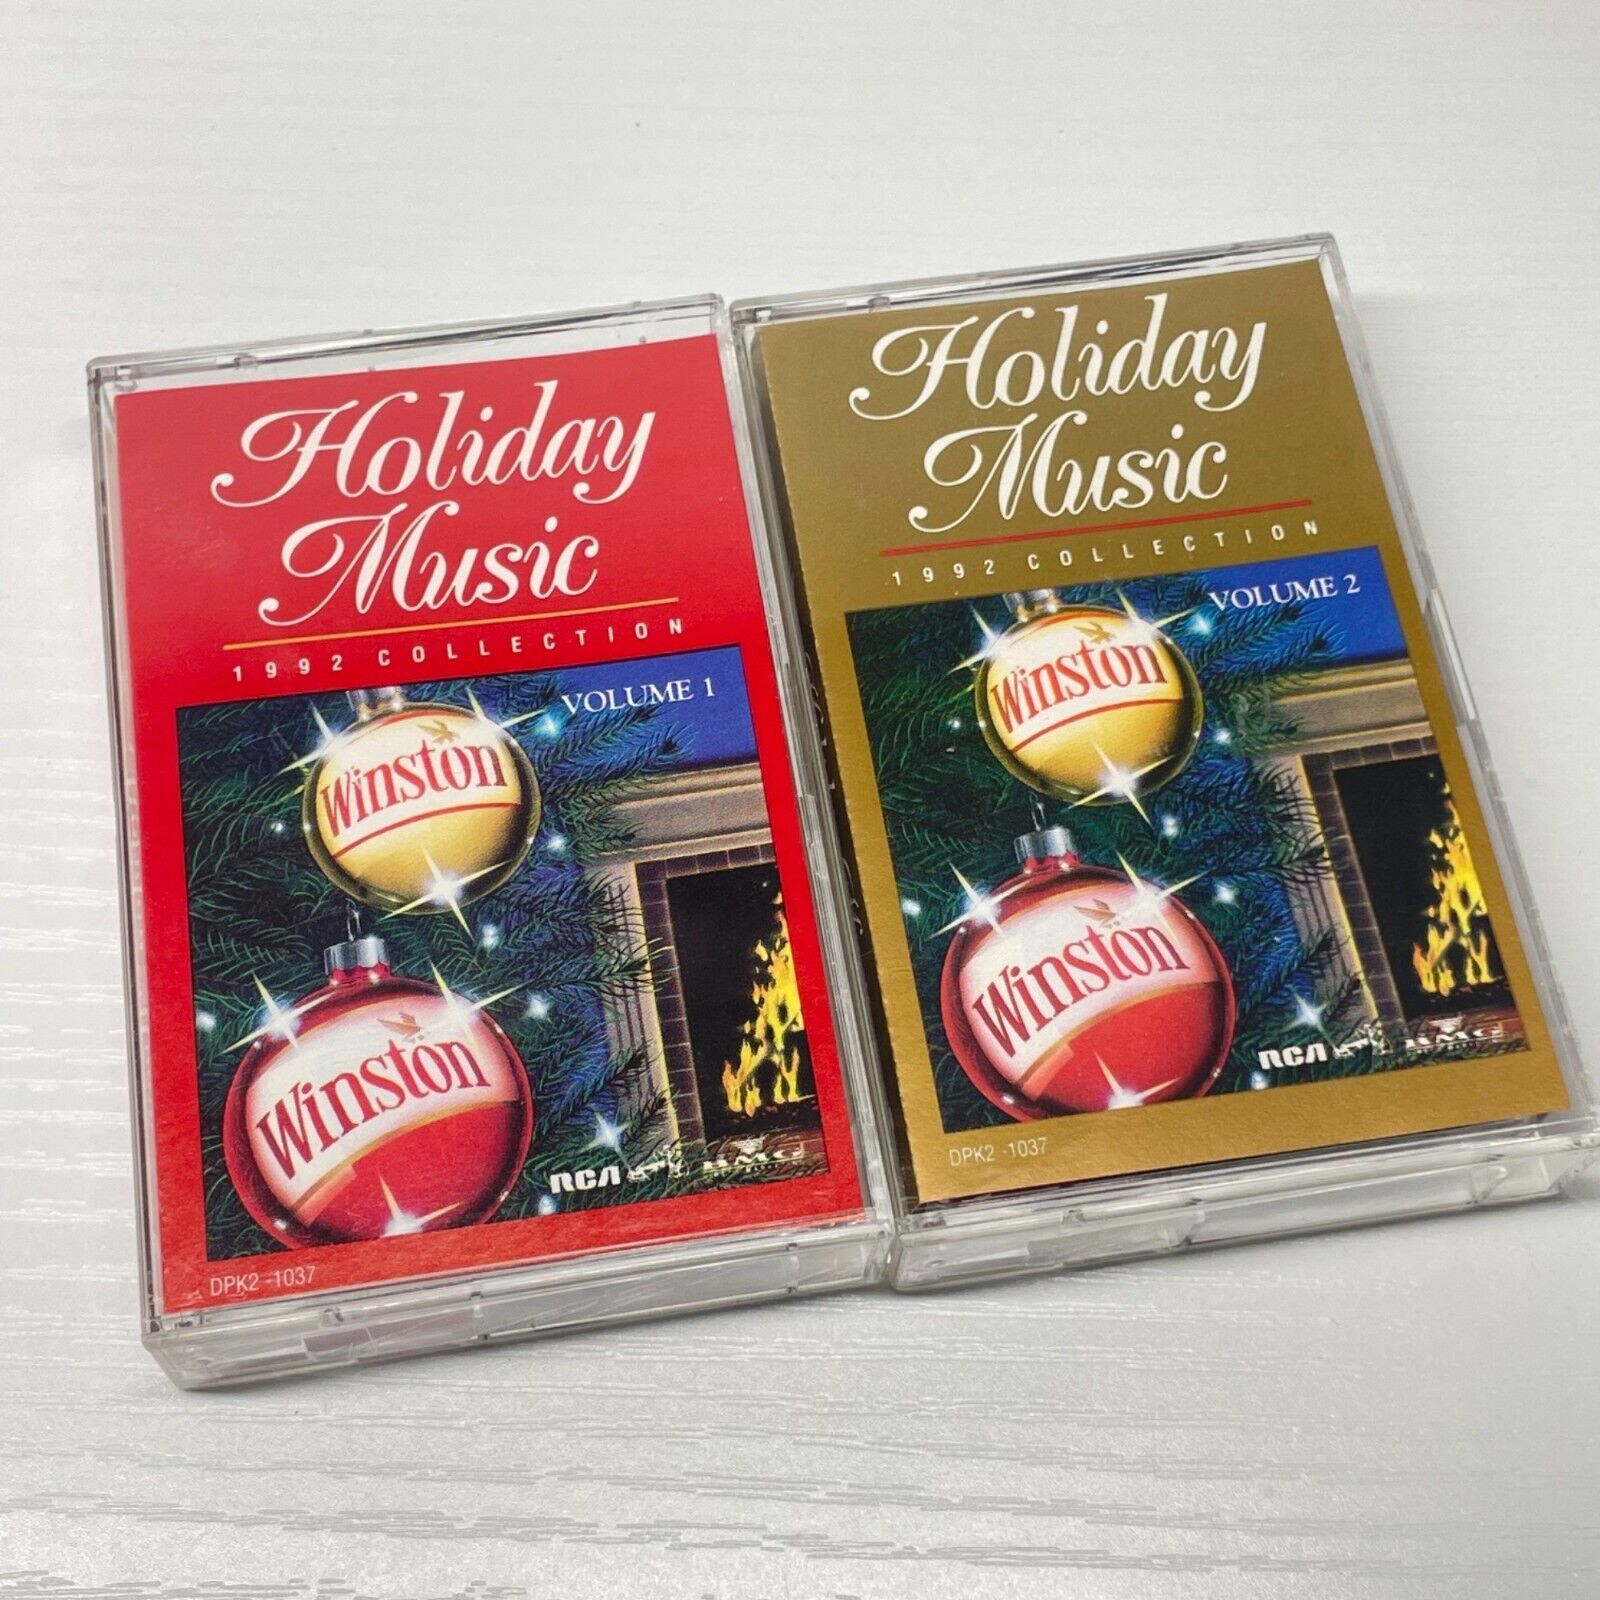 Untested Vintage 1992 Set of 2 Winston Holiday Music Collections Cassette Tapes